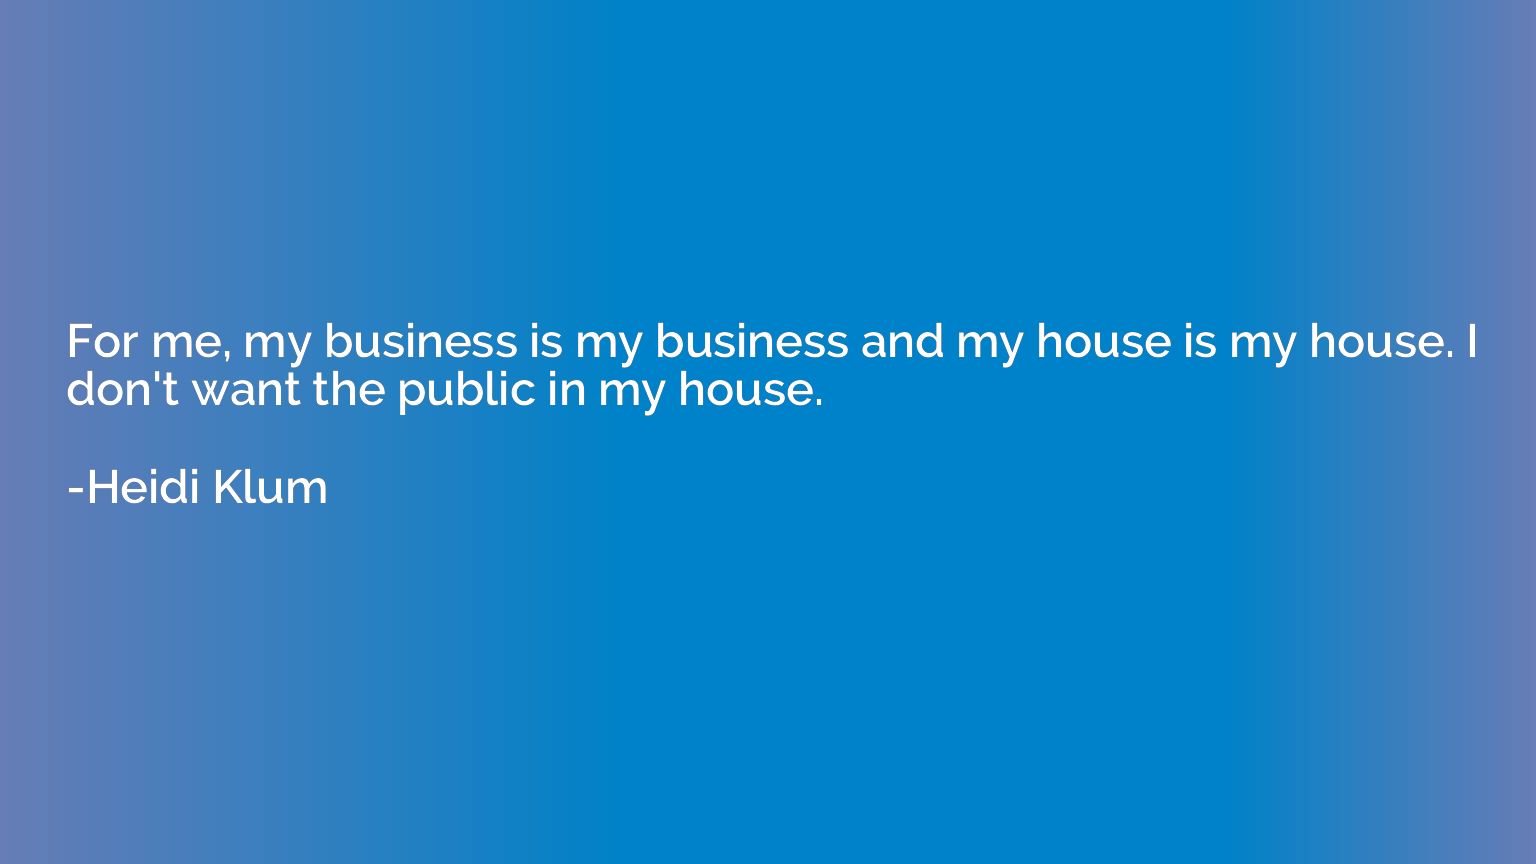 For me, my business is my business and my house is my house.